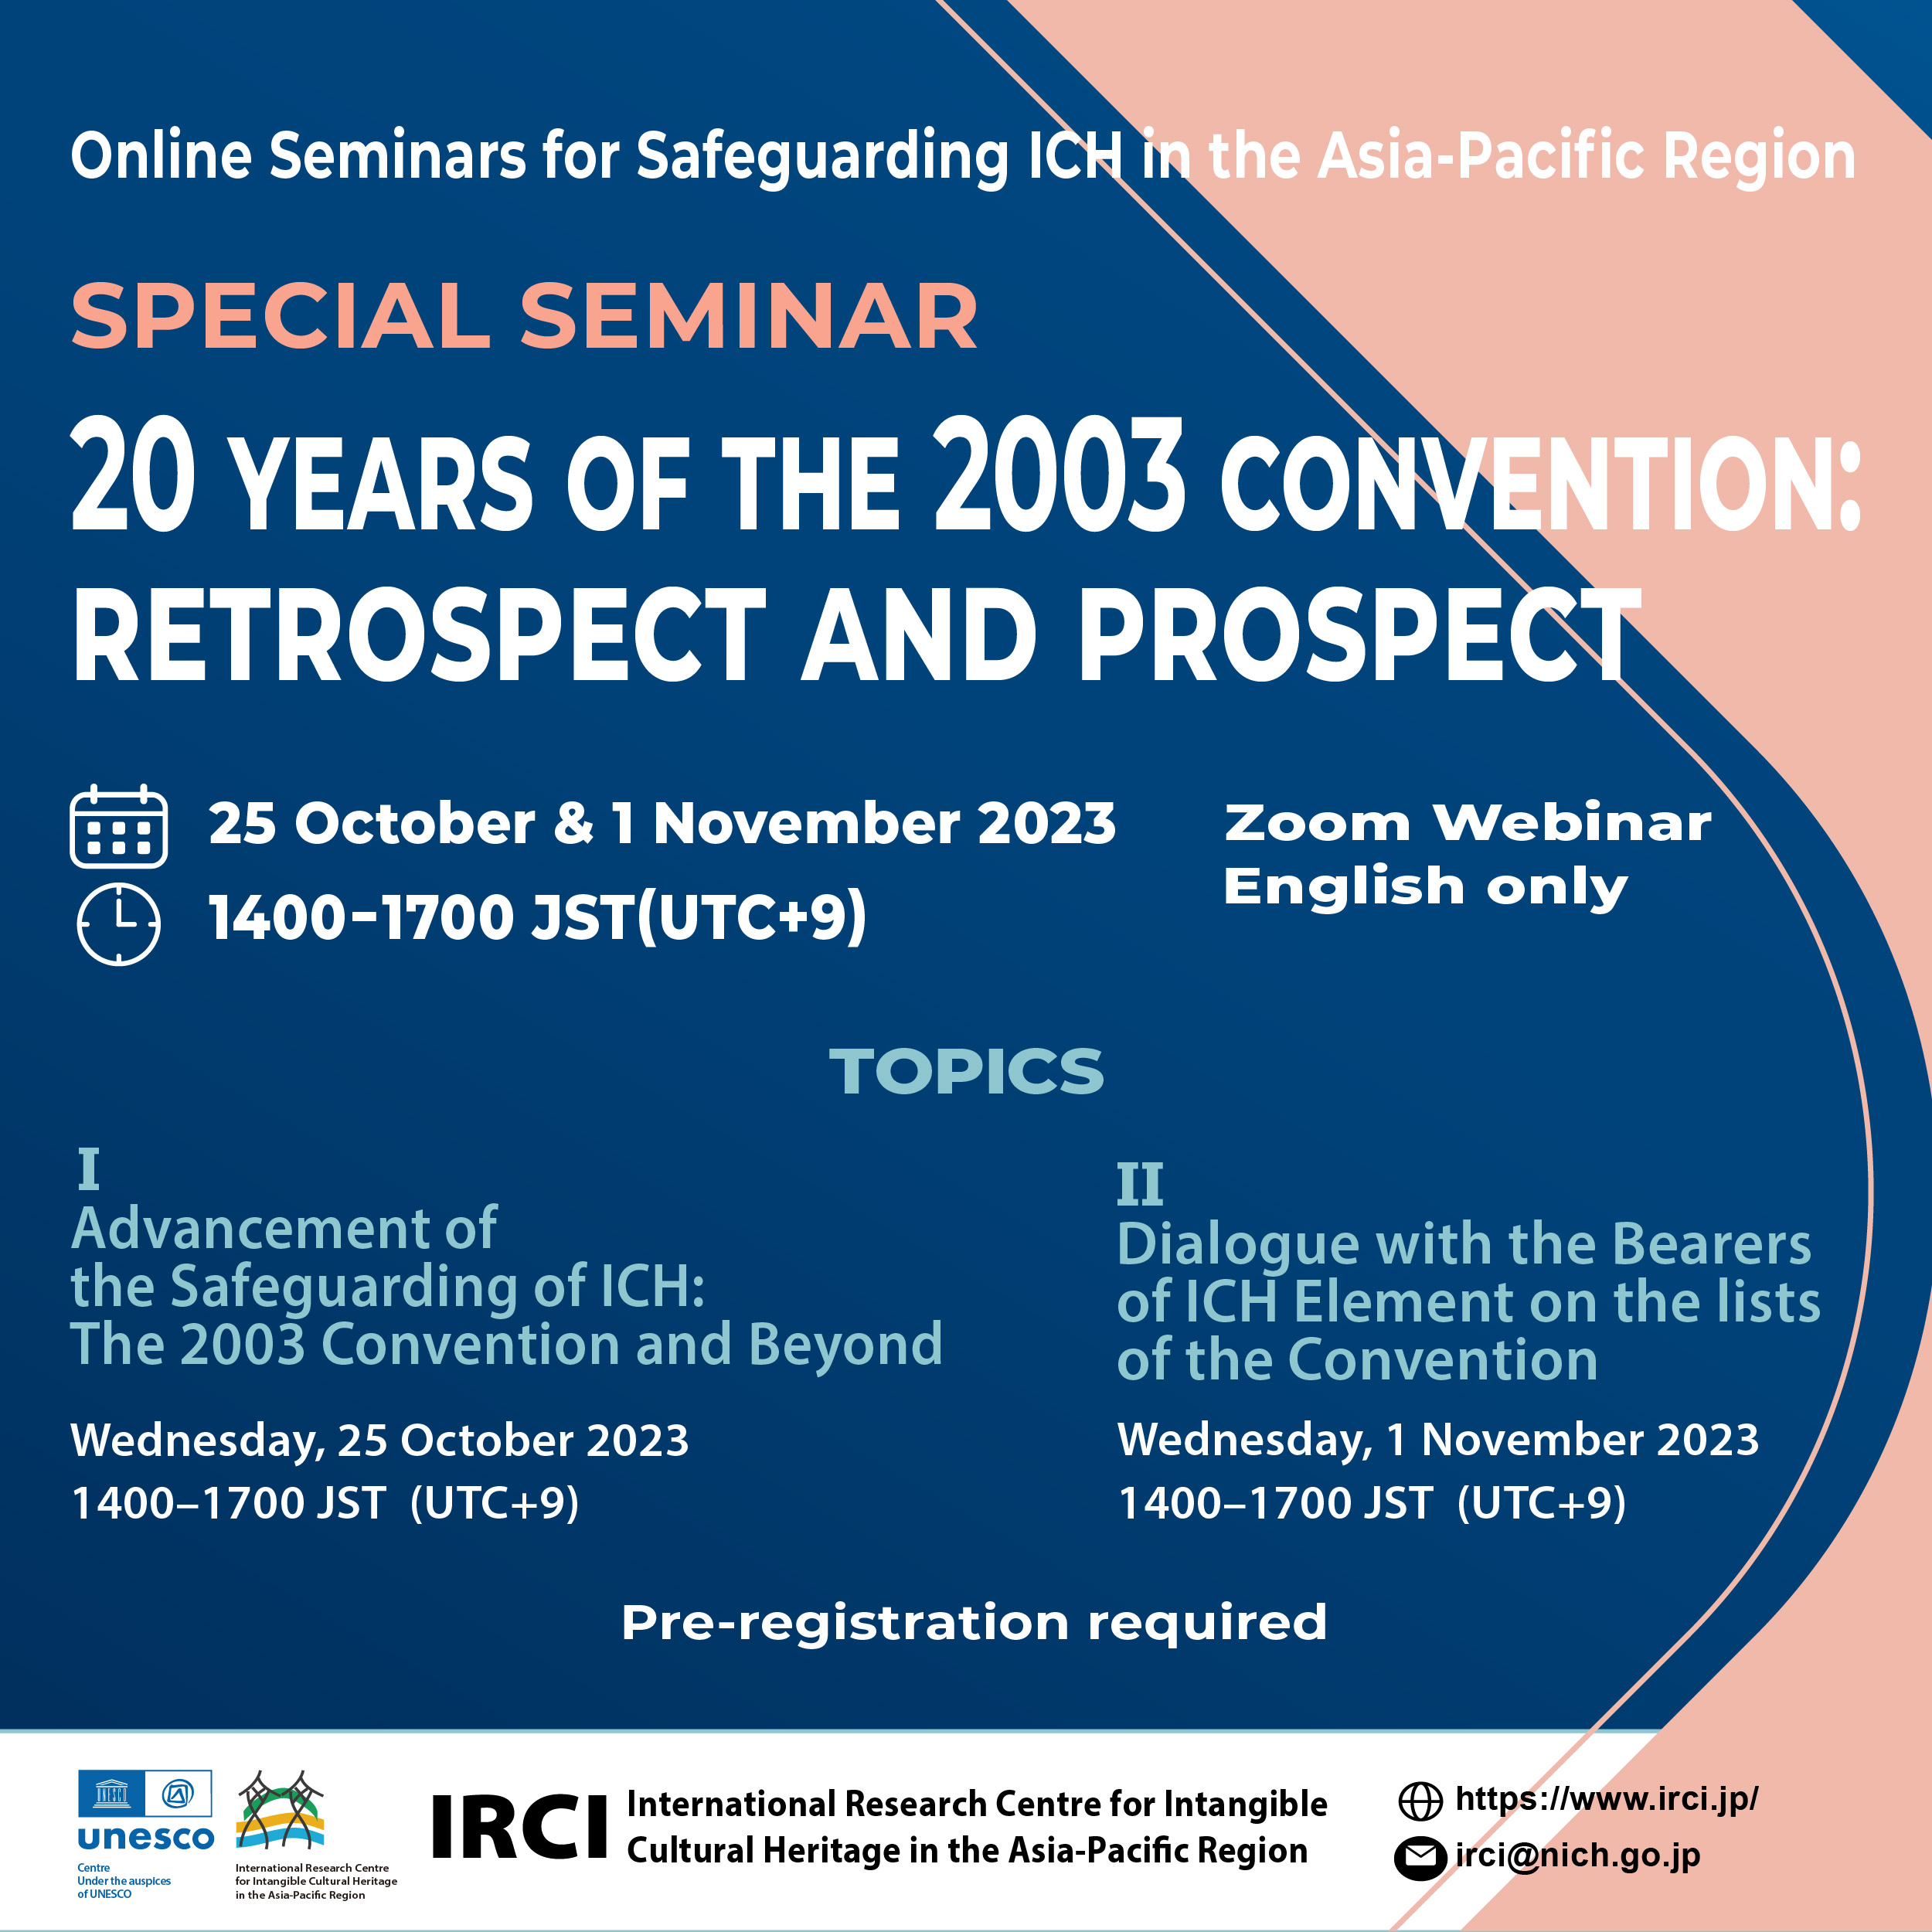 Special Online Seminar ‘20 YEARS OF THE 2003 CONVENTION: RETROSPECT AND PROSPECT’